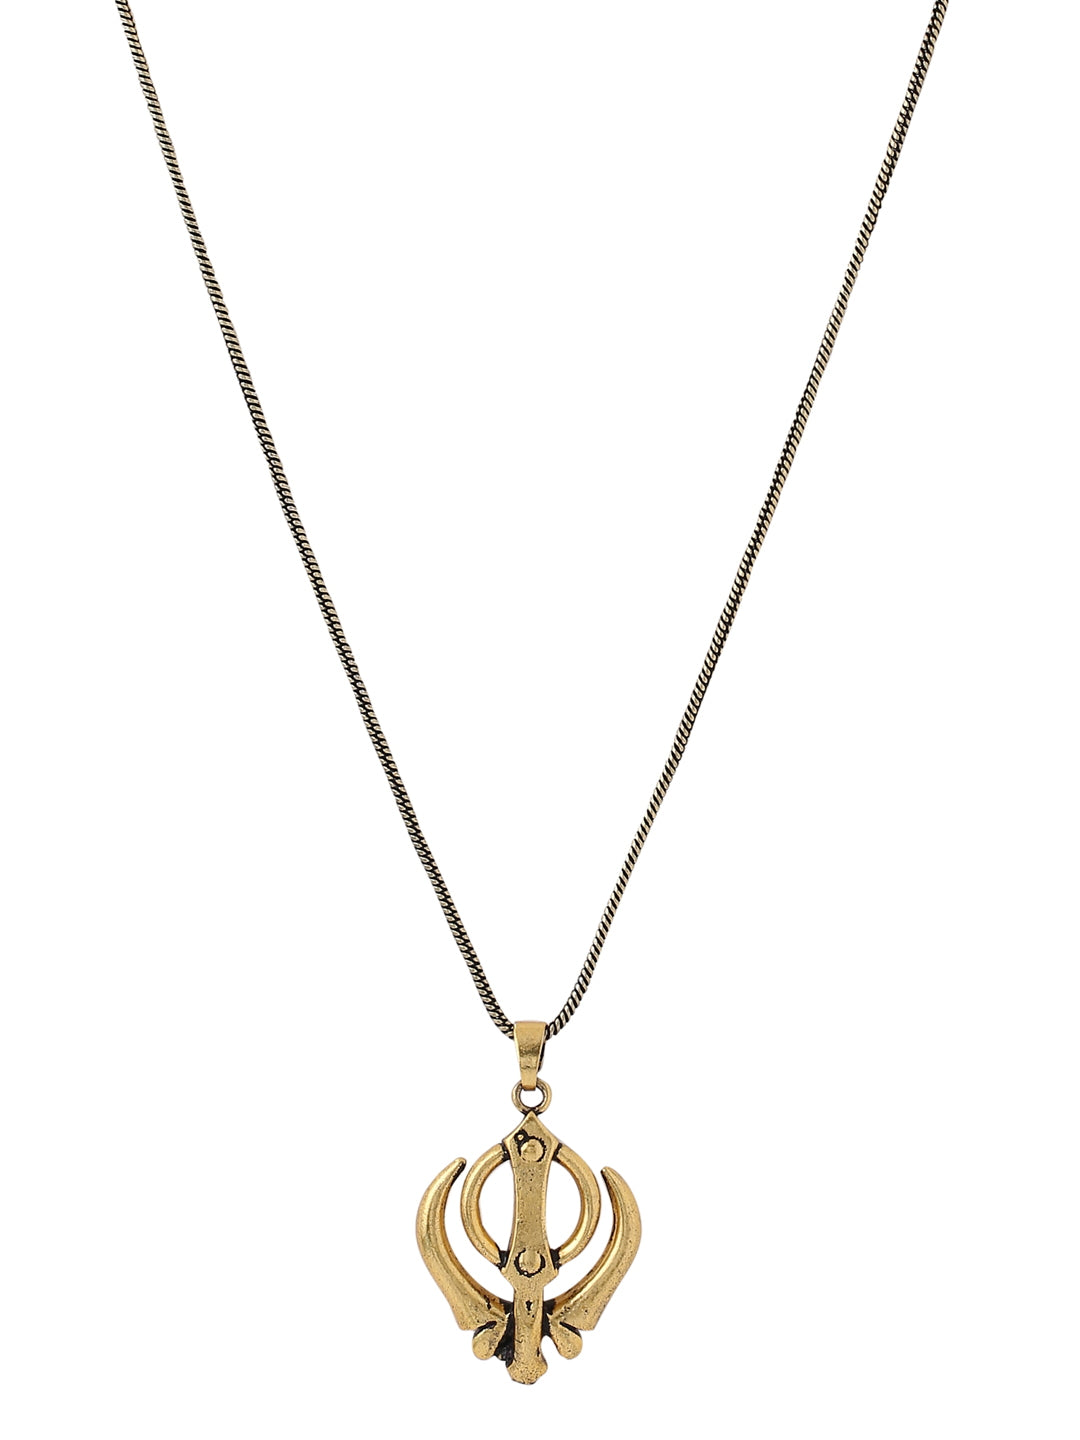 Gold Plated Sikh Khanda Pendant with Chain -Viraasi